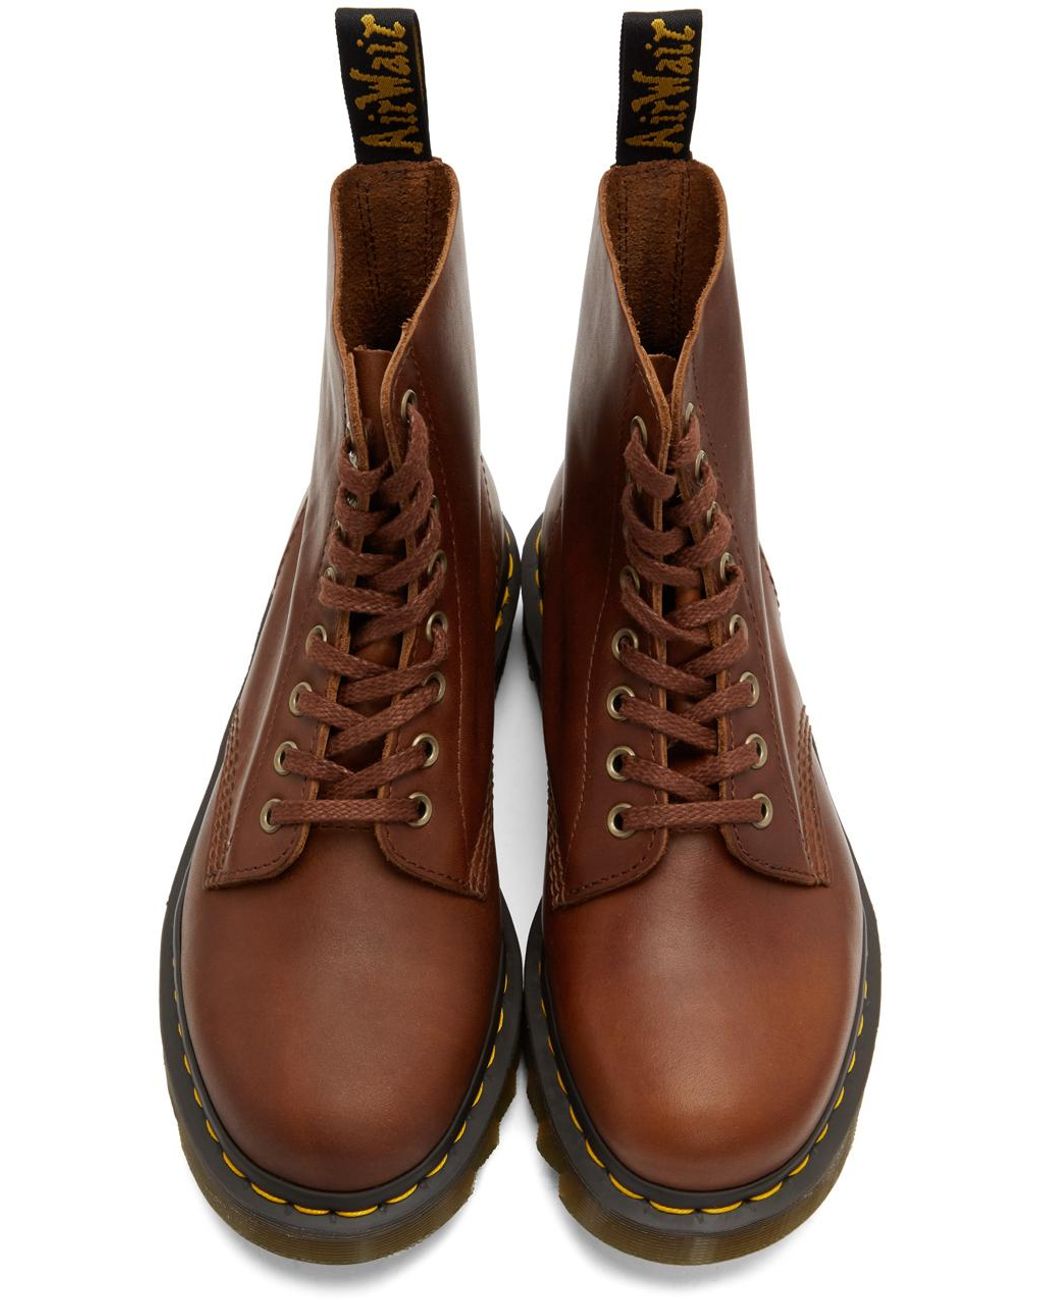 Dr. Martens 1460 Ambassador Soft Leather Pascal 8-eye Boots in